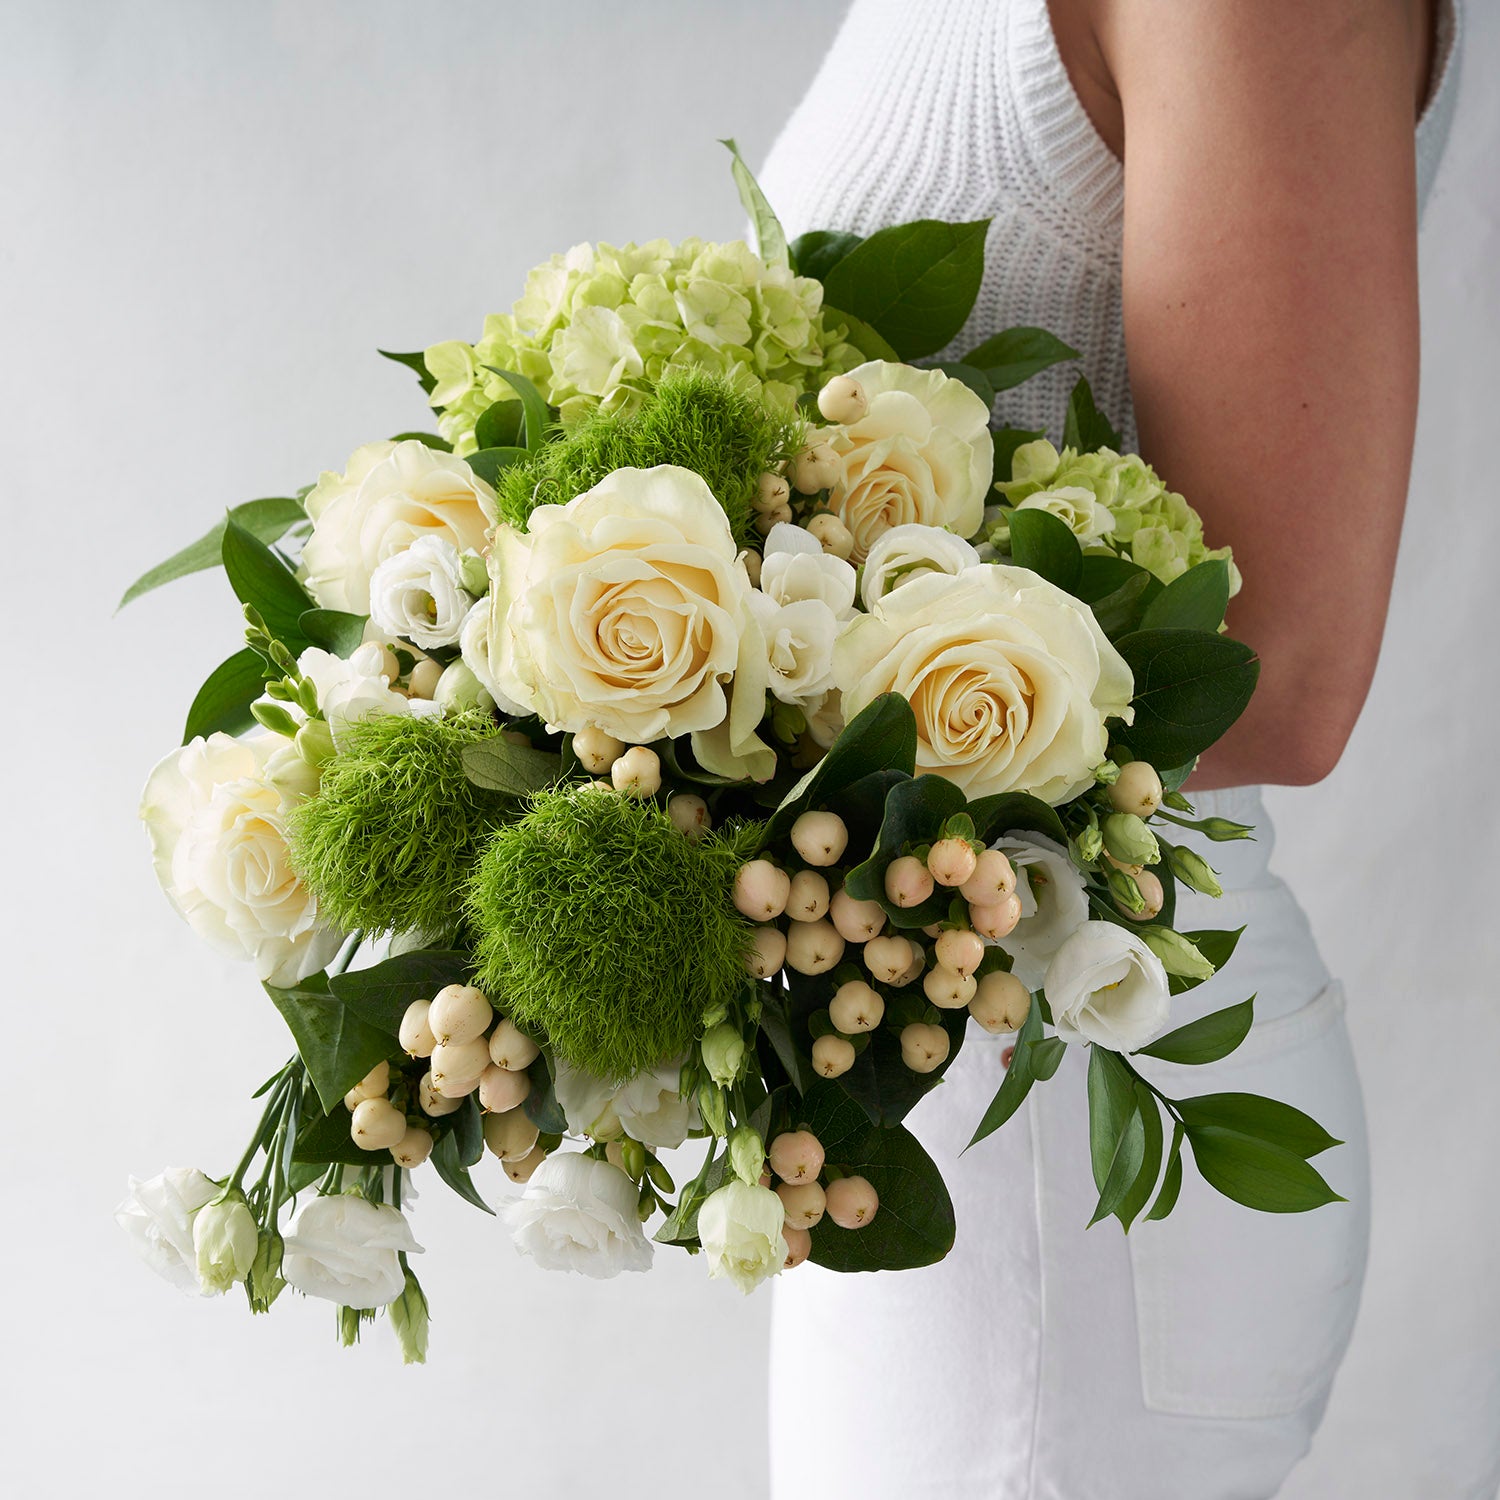 Woman in white holding white roses, cream hypericum berries, and green dianthus.